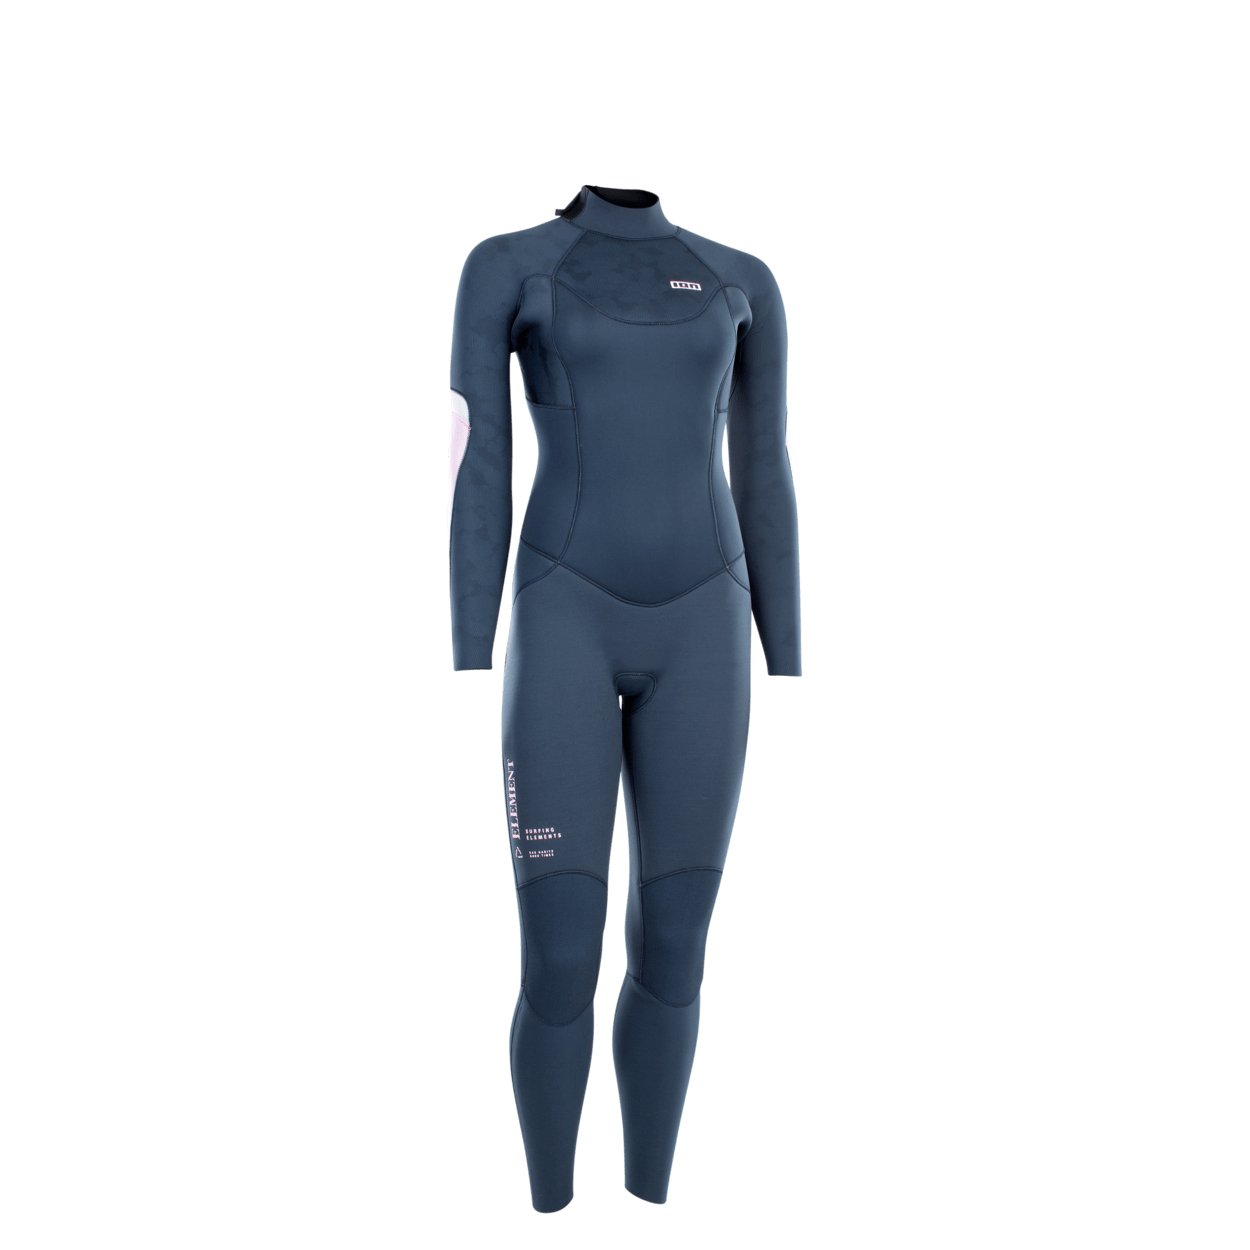 ION Women Wetsuit Element 5/4 Back Zip 2023 - Worthing Watersports - 9008415951864 - Wetsuits - ION Water